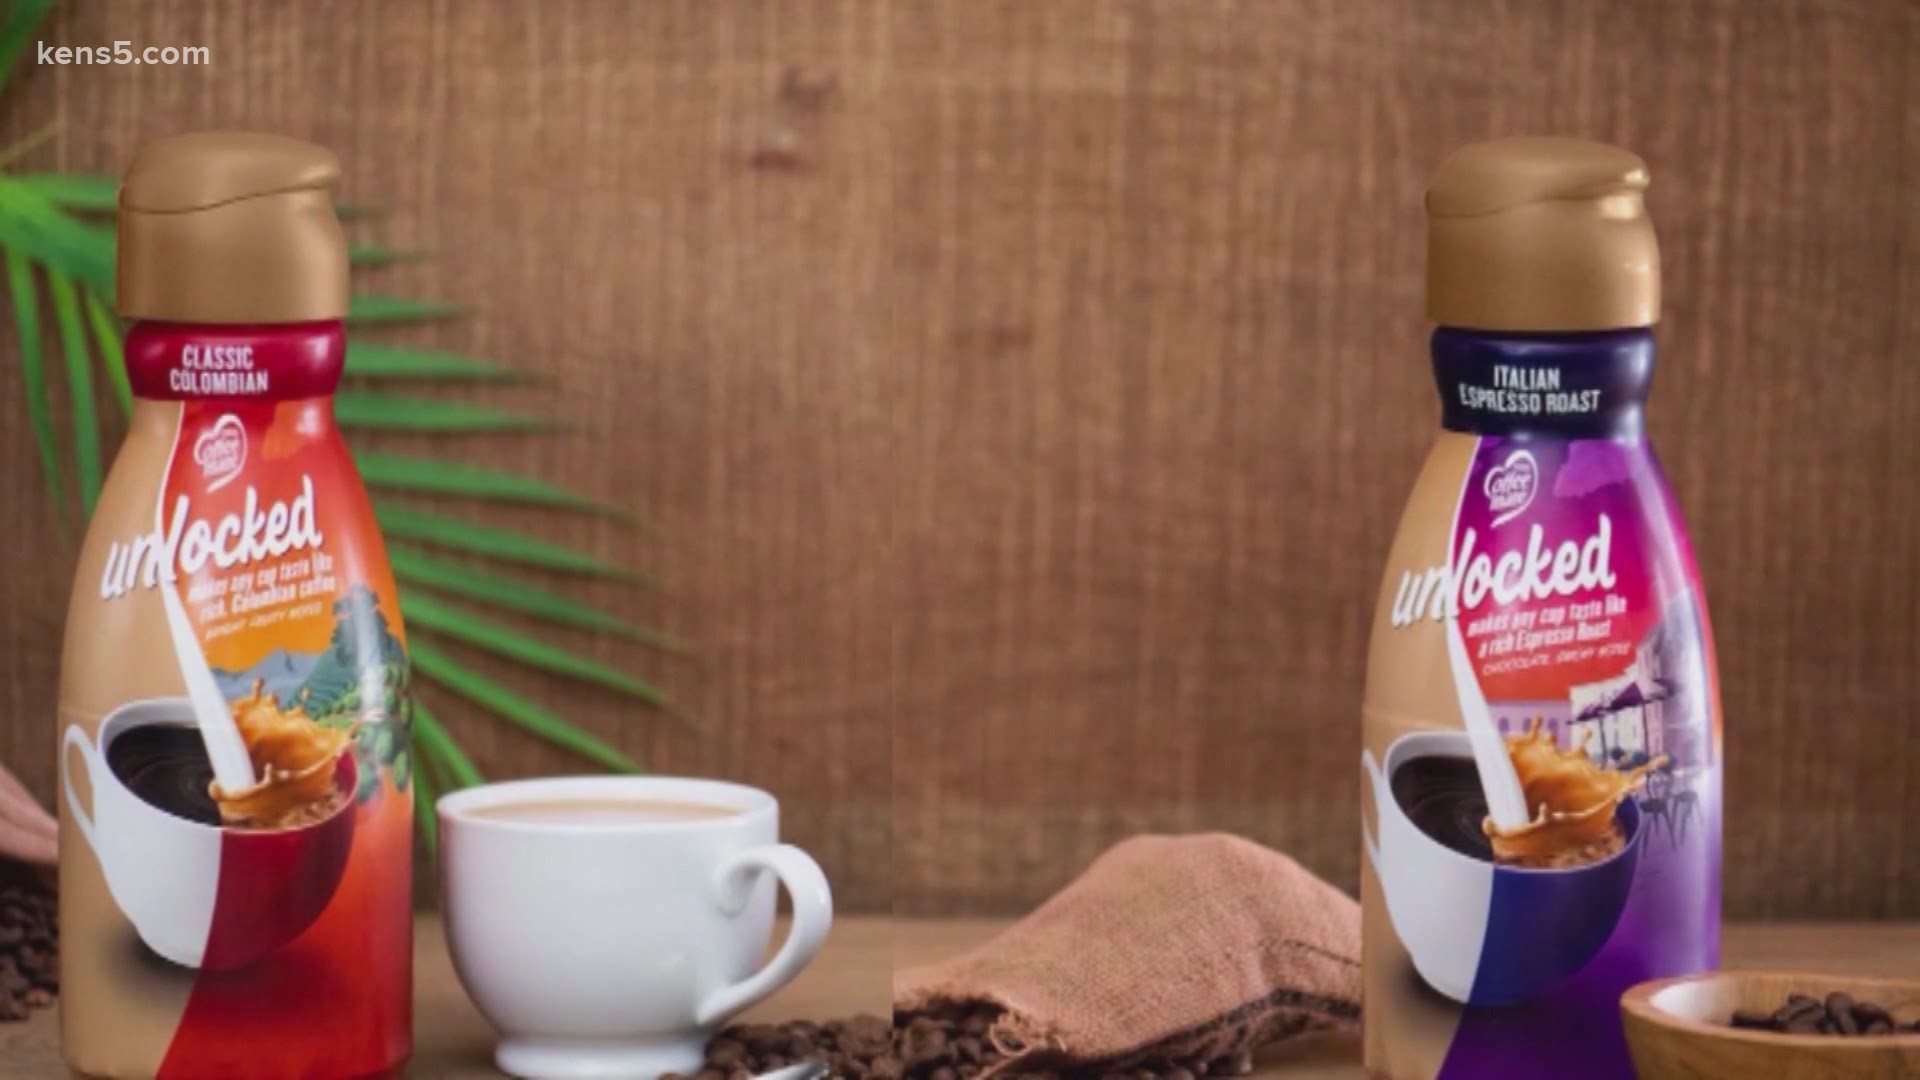 This January, Coffee-Mate is introducing a new line-- "Unlocked by Coffee-Mate."